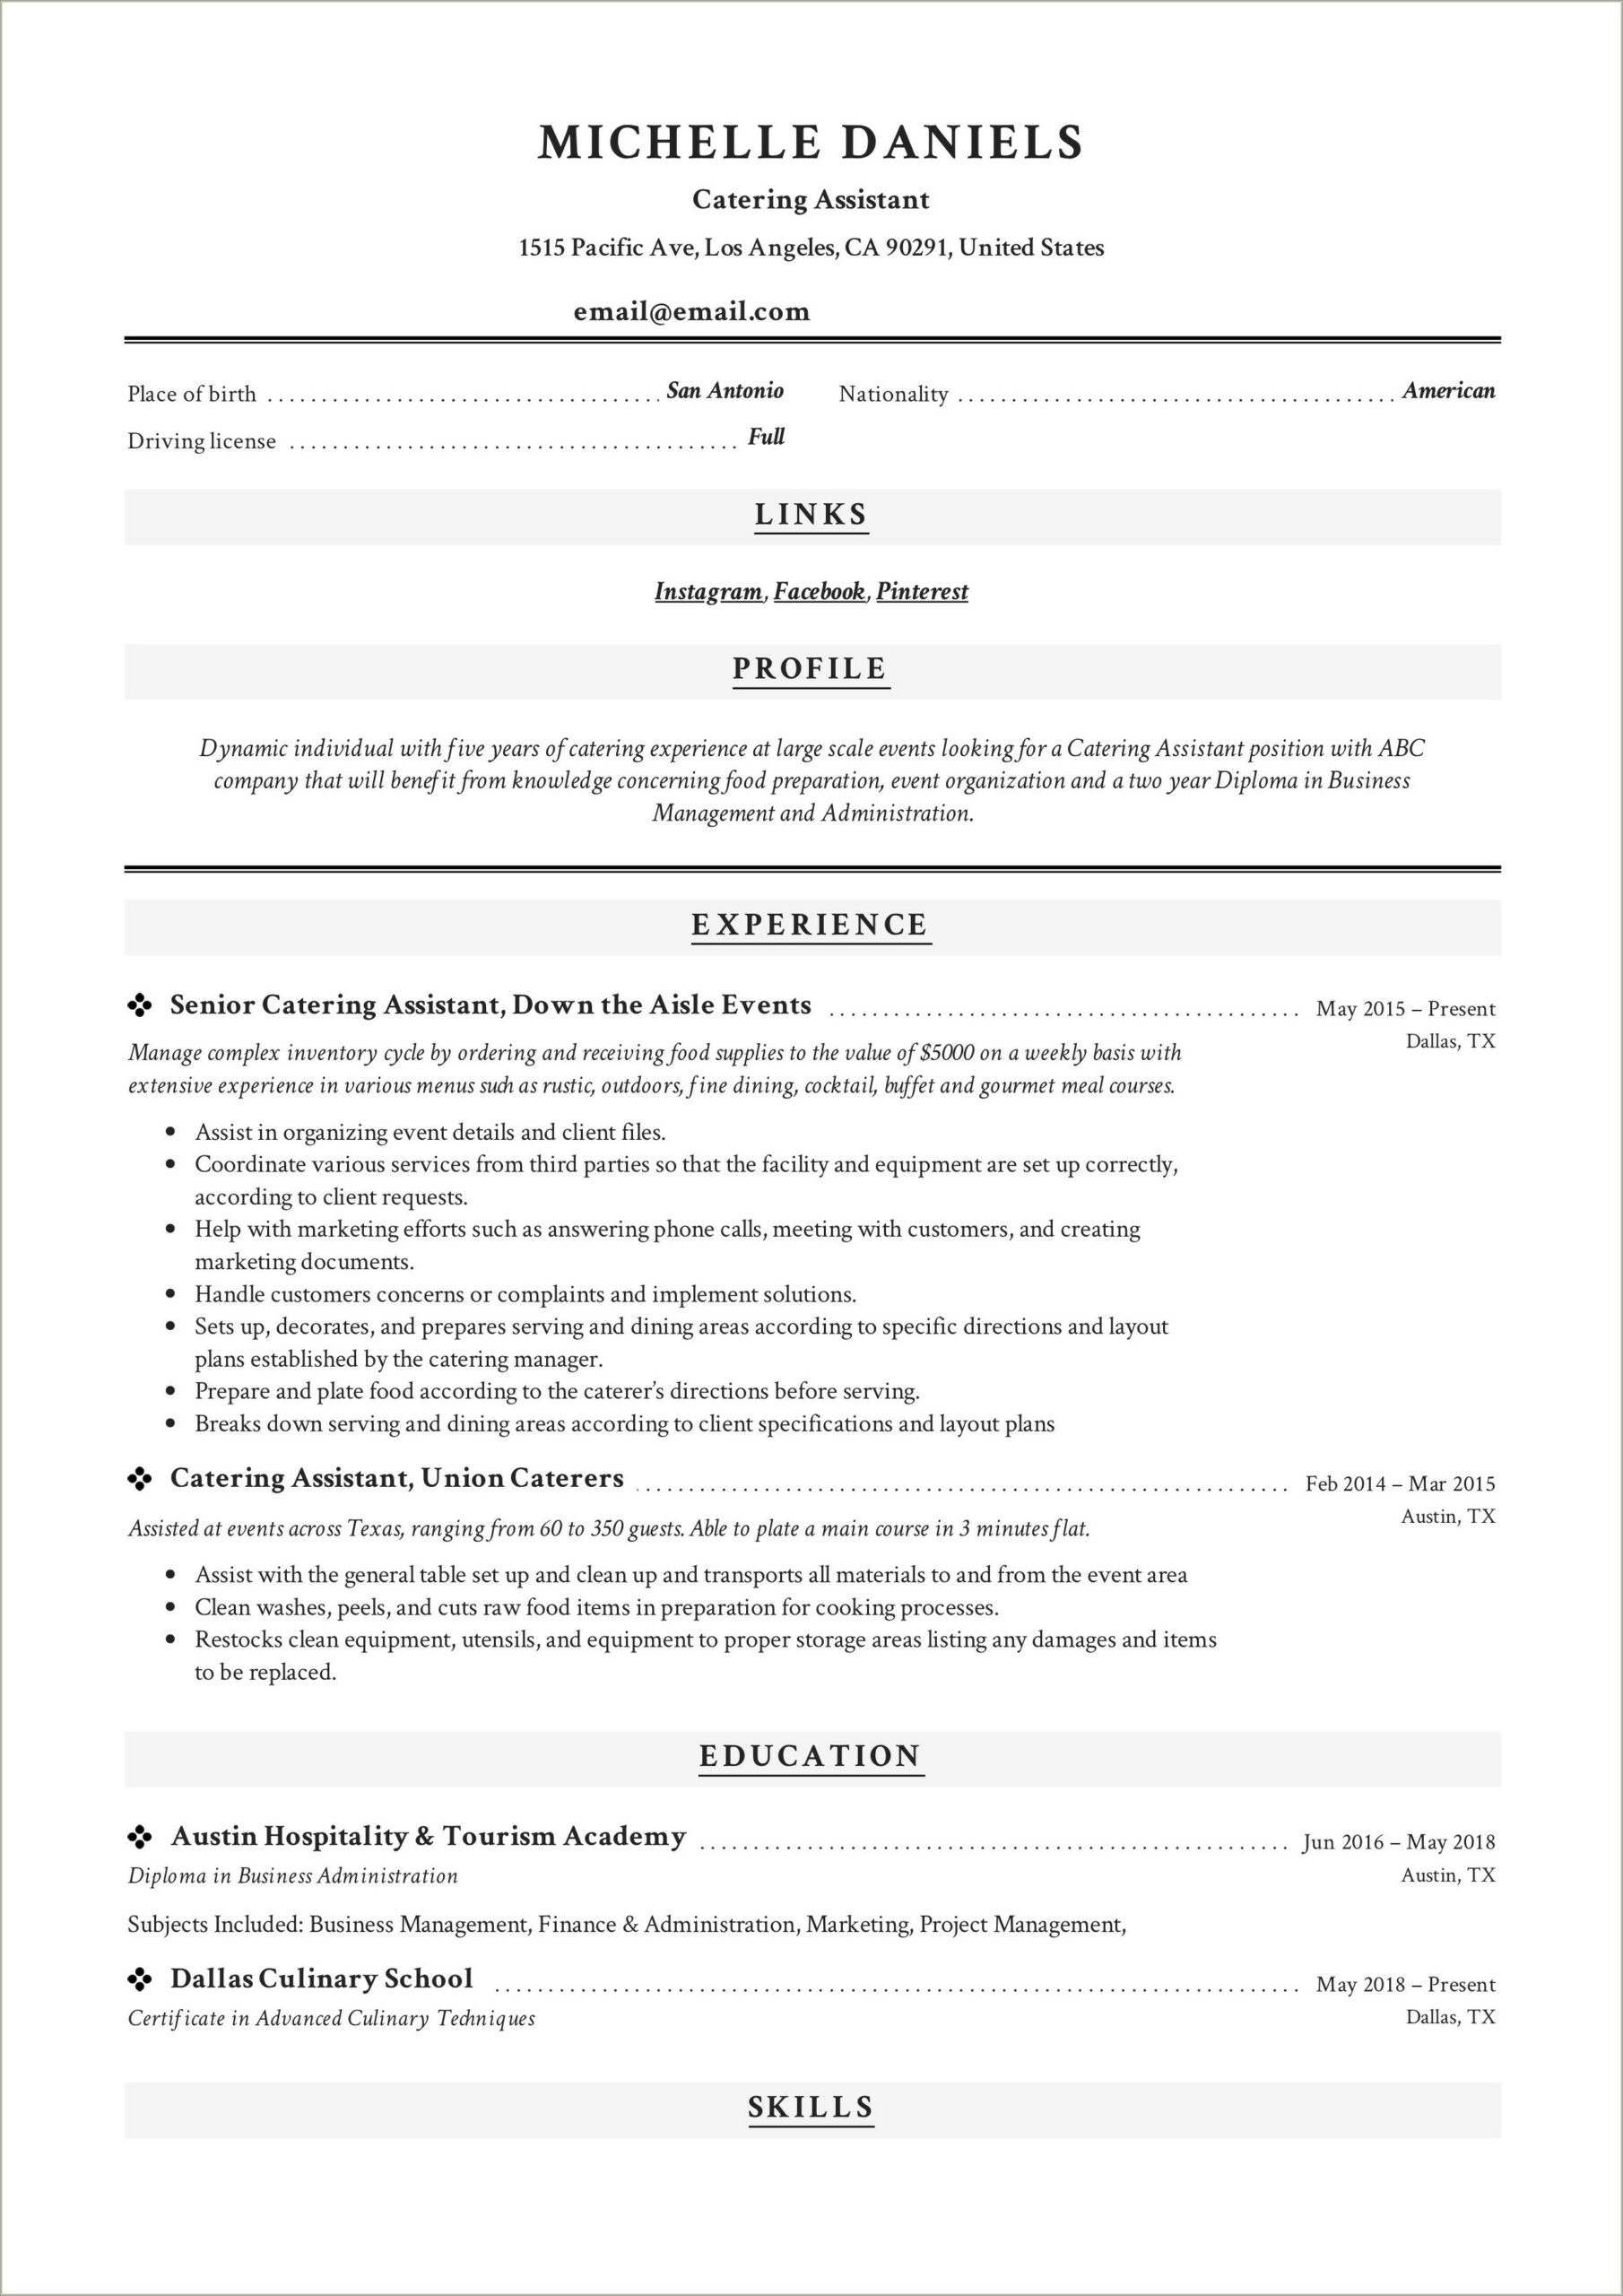 Bakery And Cooking Assistant Resume Sample